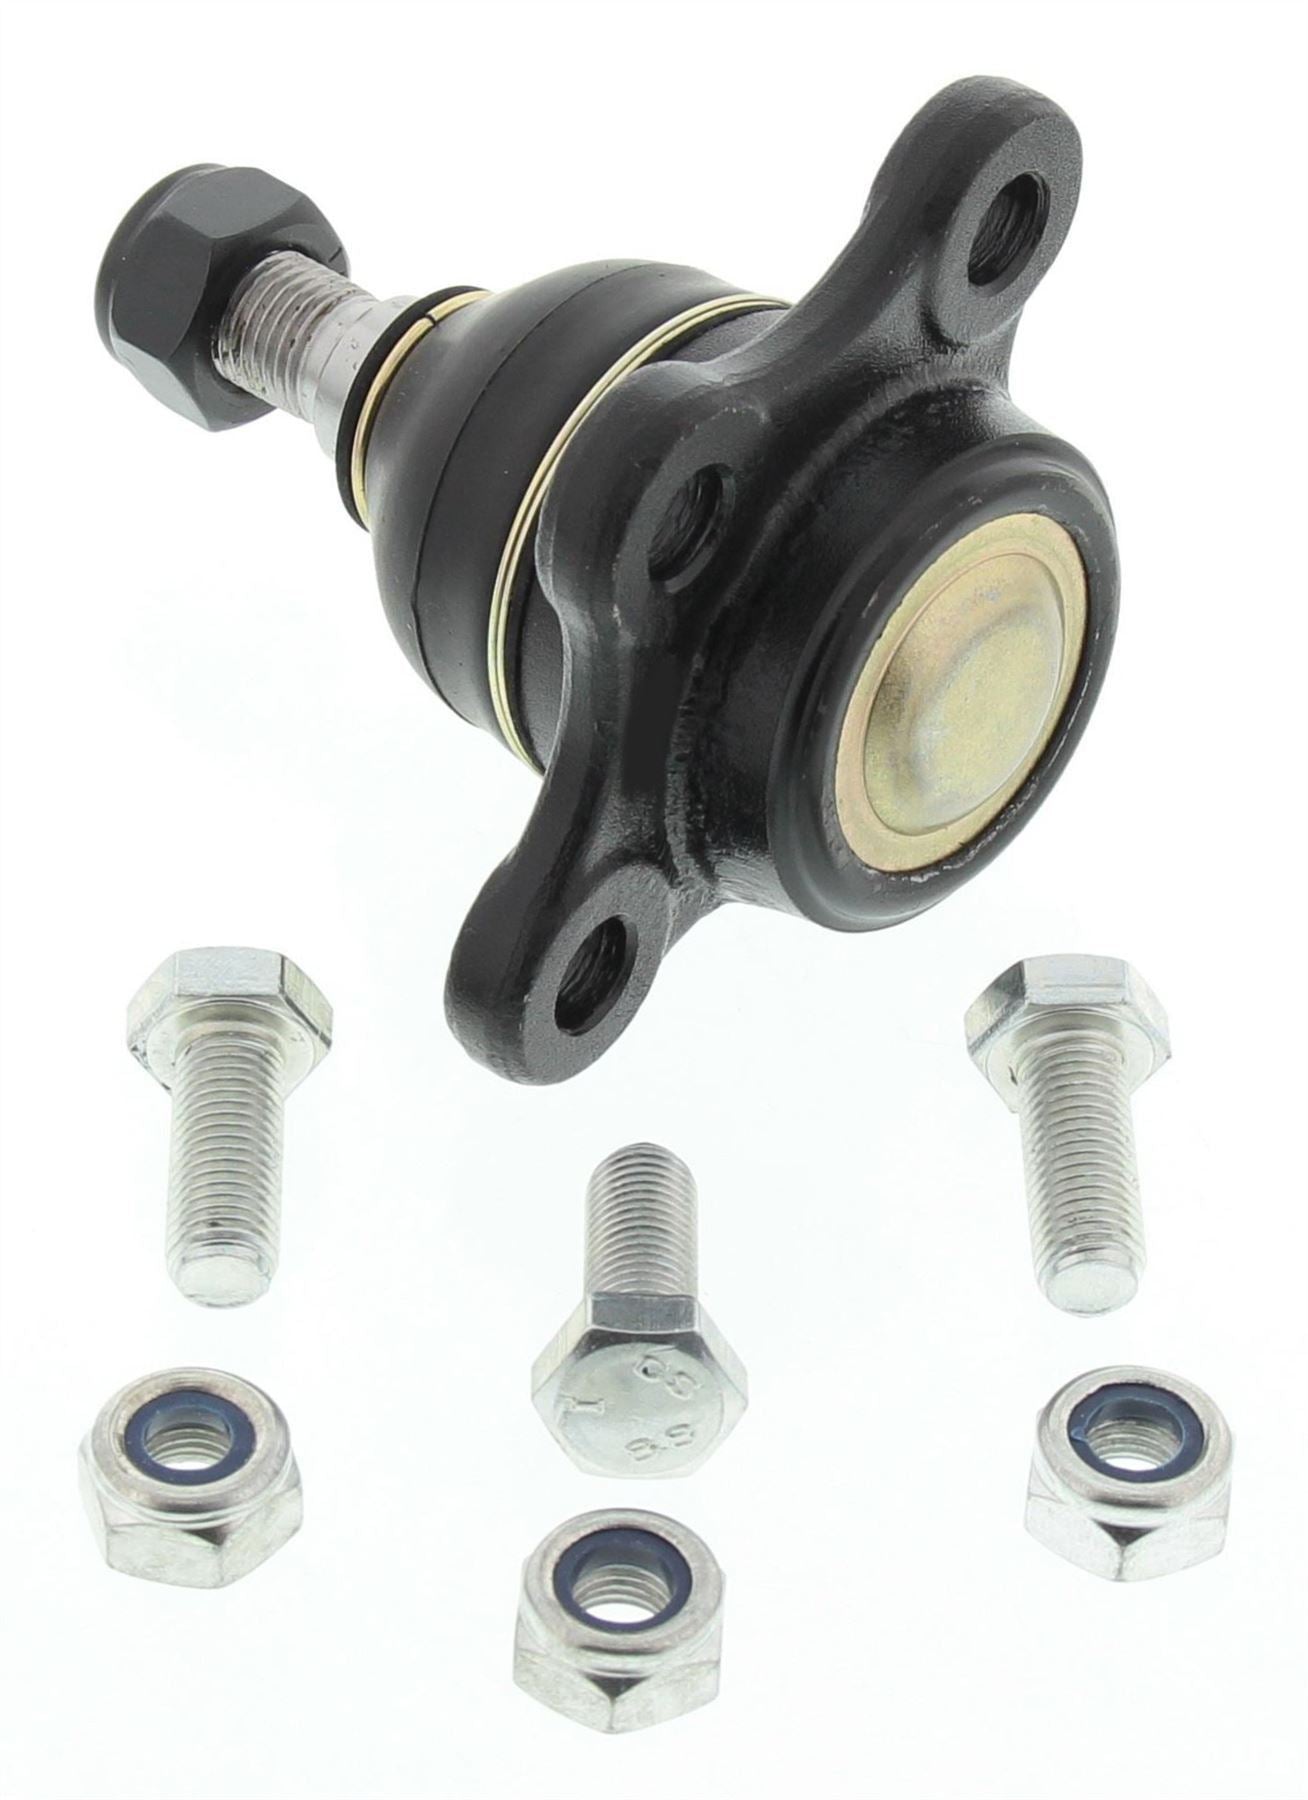 Opel Vauxhall Frontera A B MK I II 1991-2004 Front Upper Ball Joints Pair